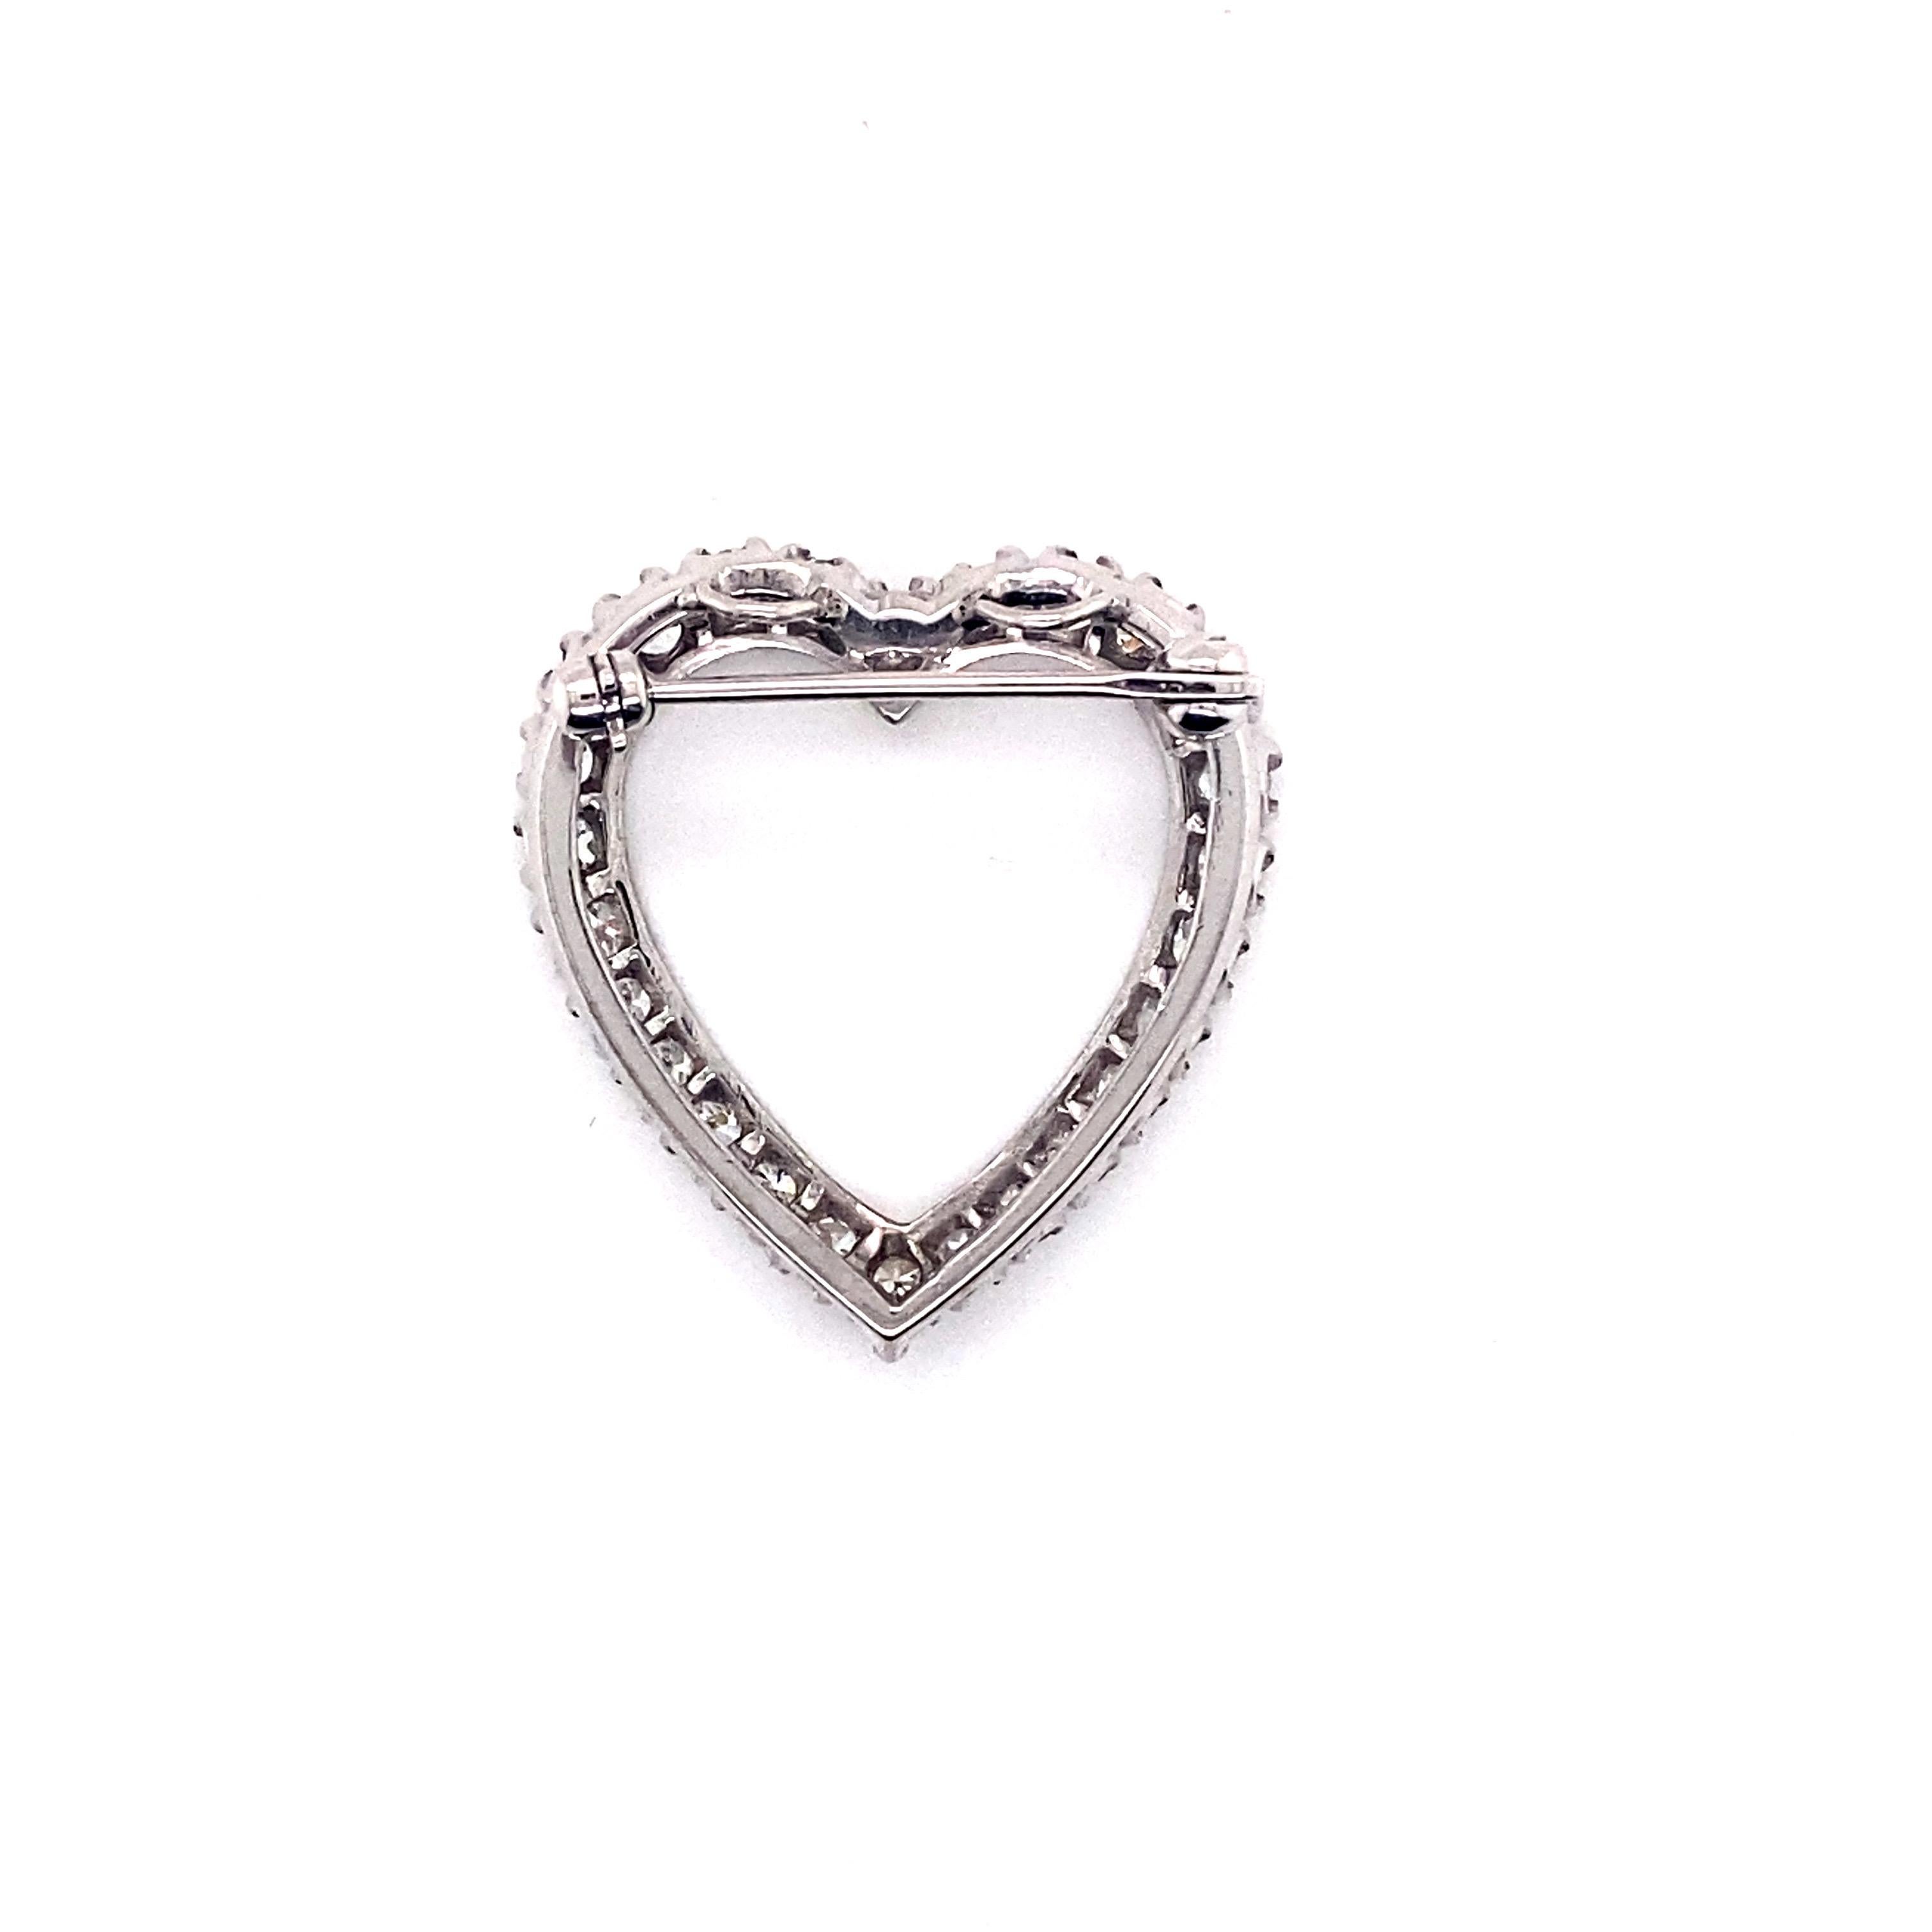 Vintage 1950’s Platinum Diamond Heart Pin and Pendant - There are 26 round full cut diamonds that weigh approximately 1.75ct total weight. The diamonds are set in fishtail prong heads and the quality is H - I color and VS1 - SI2 clarity. The pin